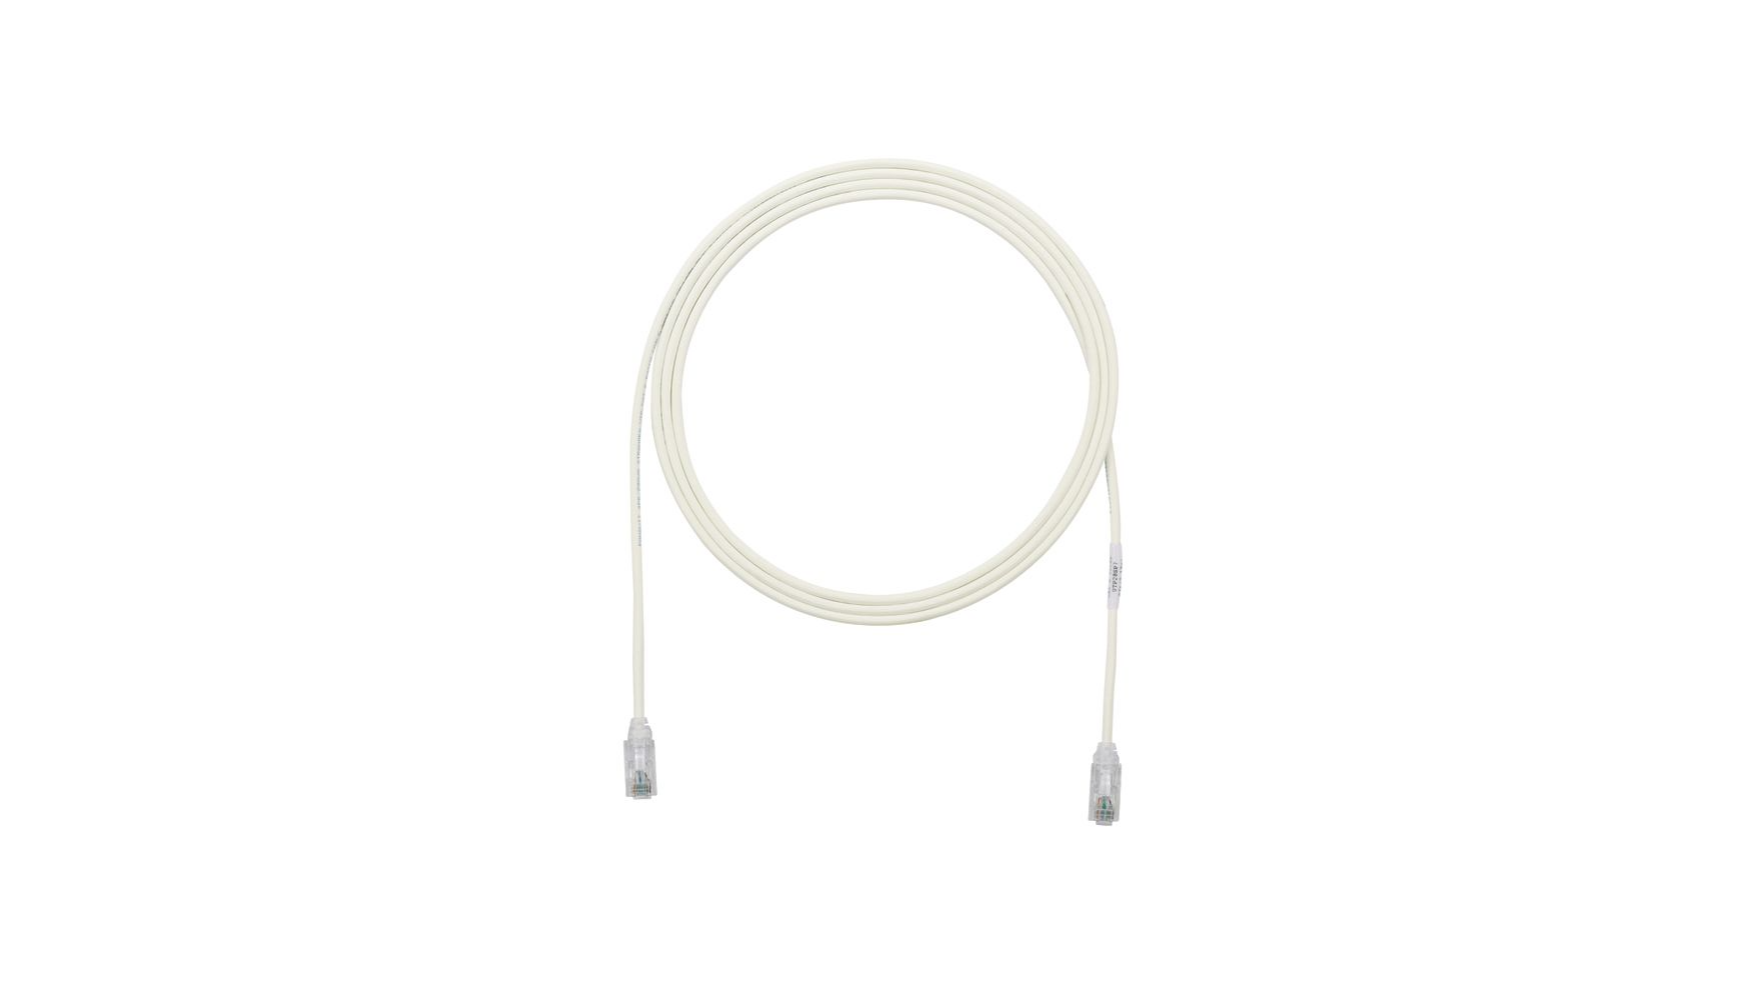 Panduit Copper Patch Cord, Cat 6, AWG 28, White UTP Cable, 2 m